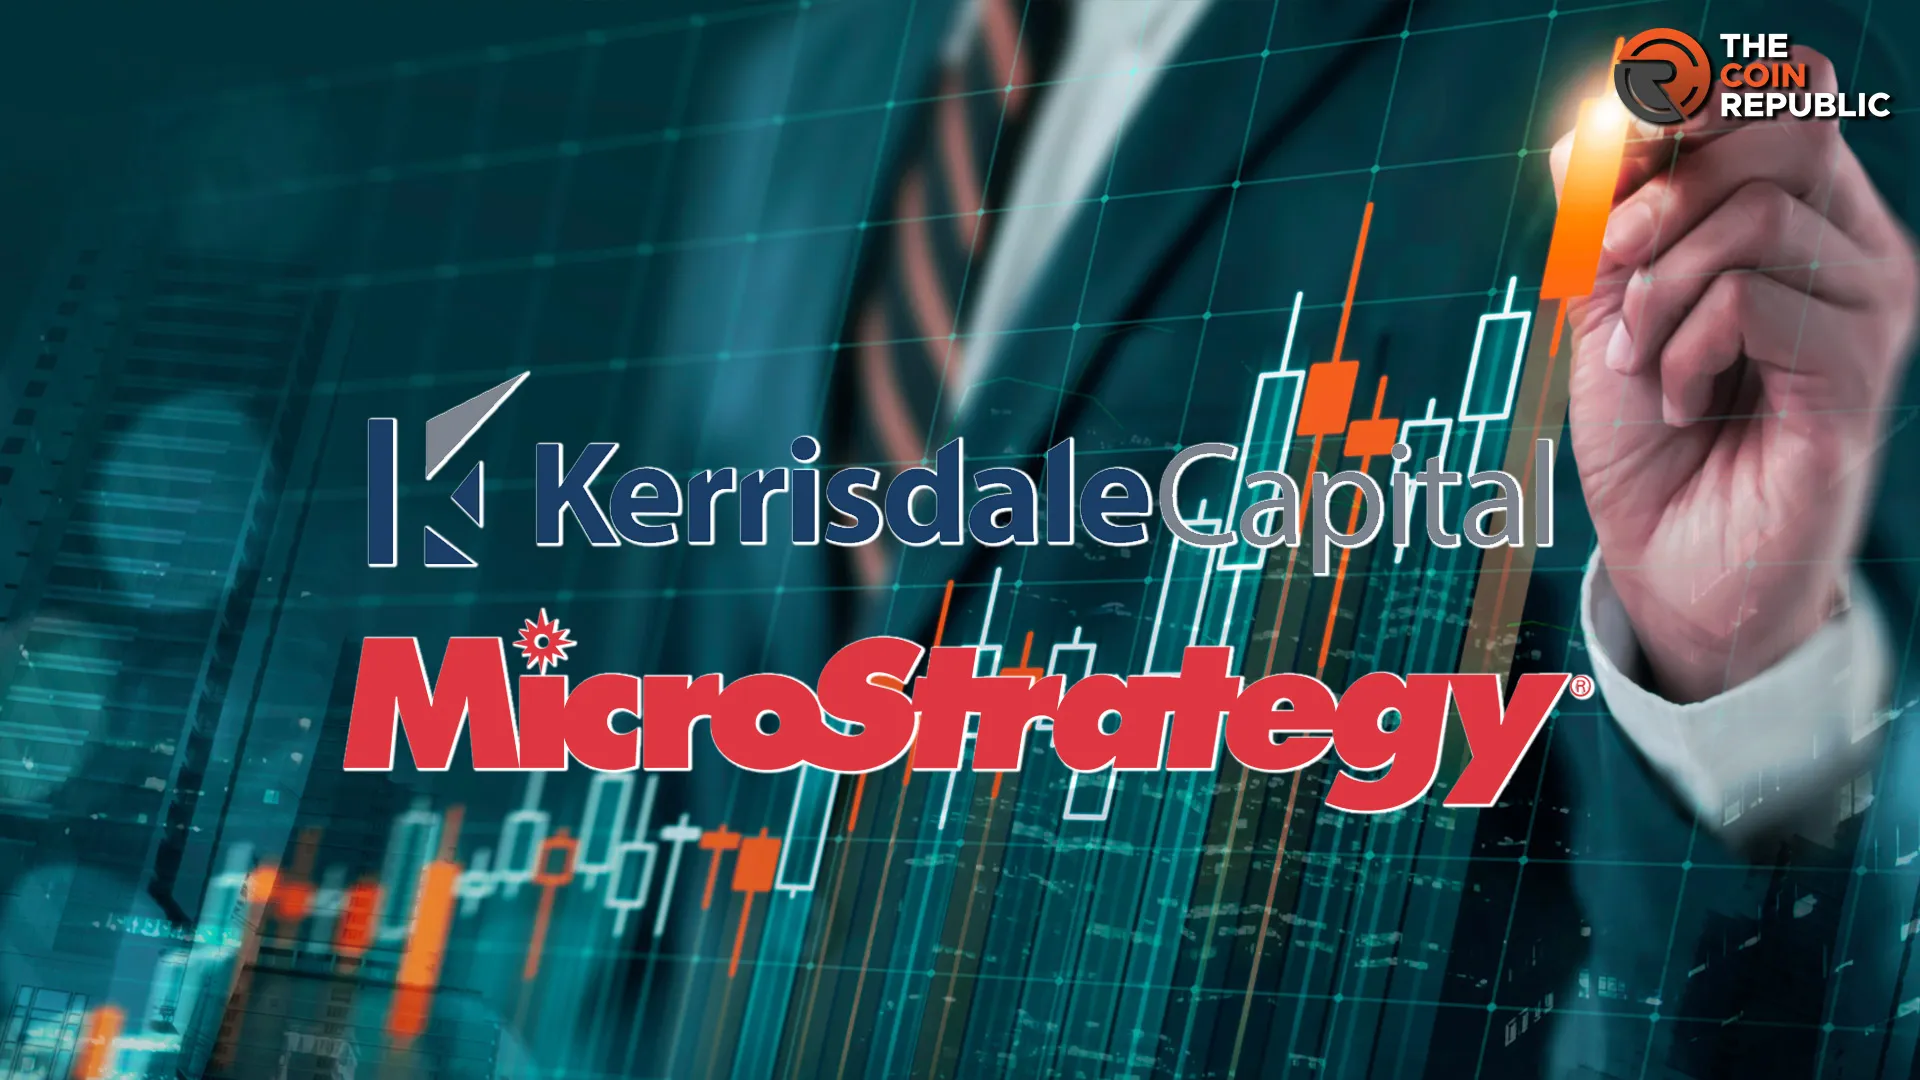 MSTR Stock is Overvalued, Claims Kerrisdale Capital; BTC Surging!  